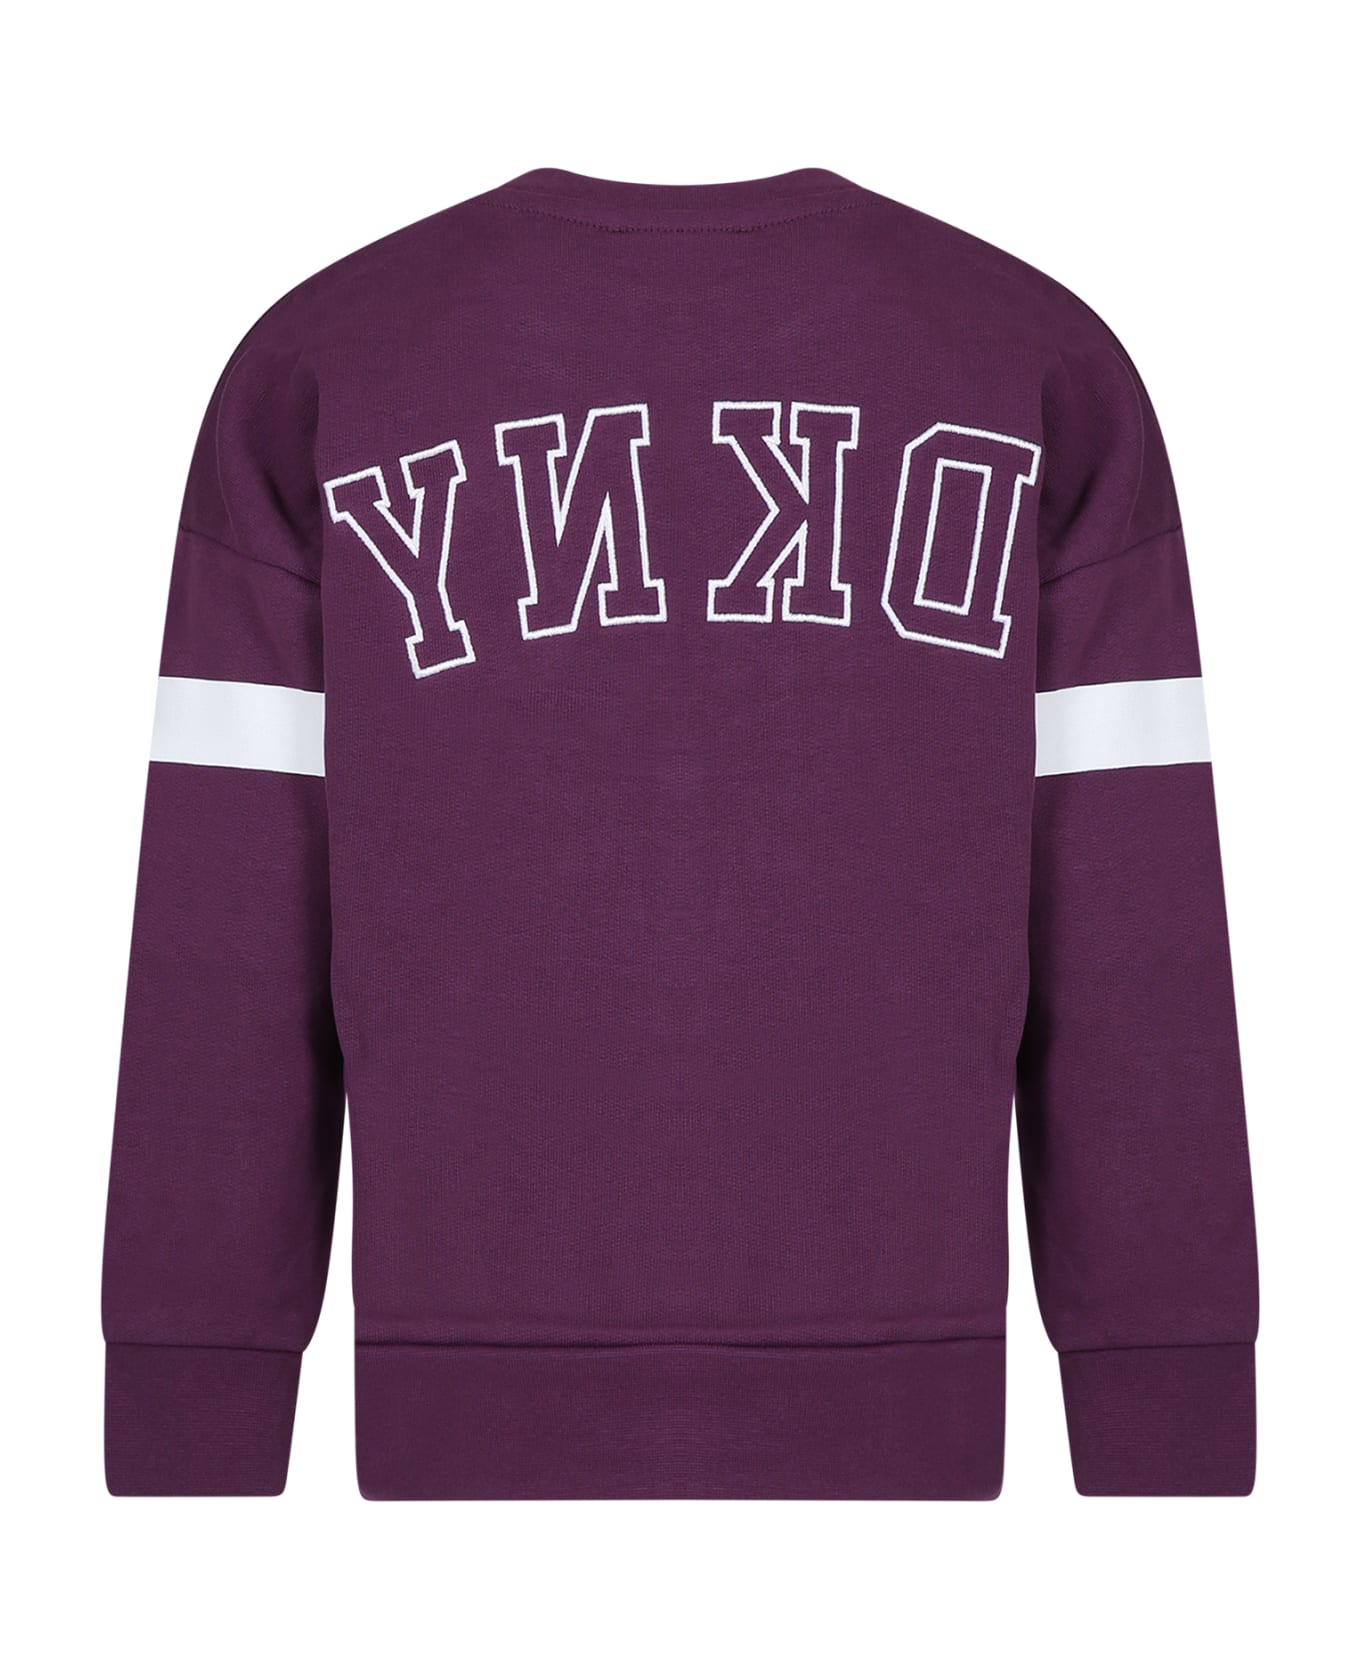 DKNY Purple Sweatshirt For Girl With Logo - Violetto